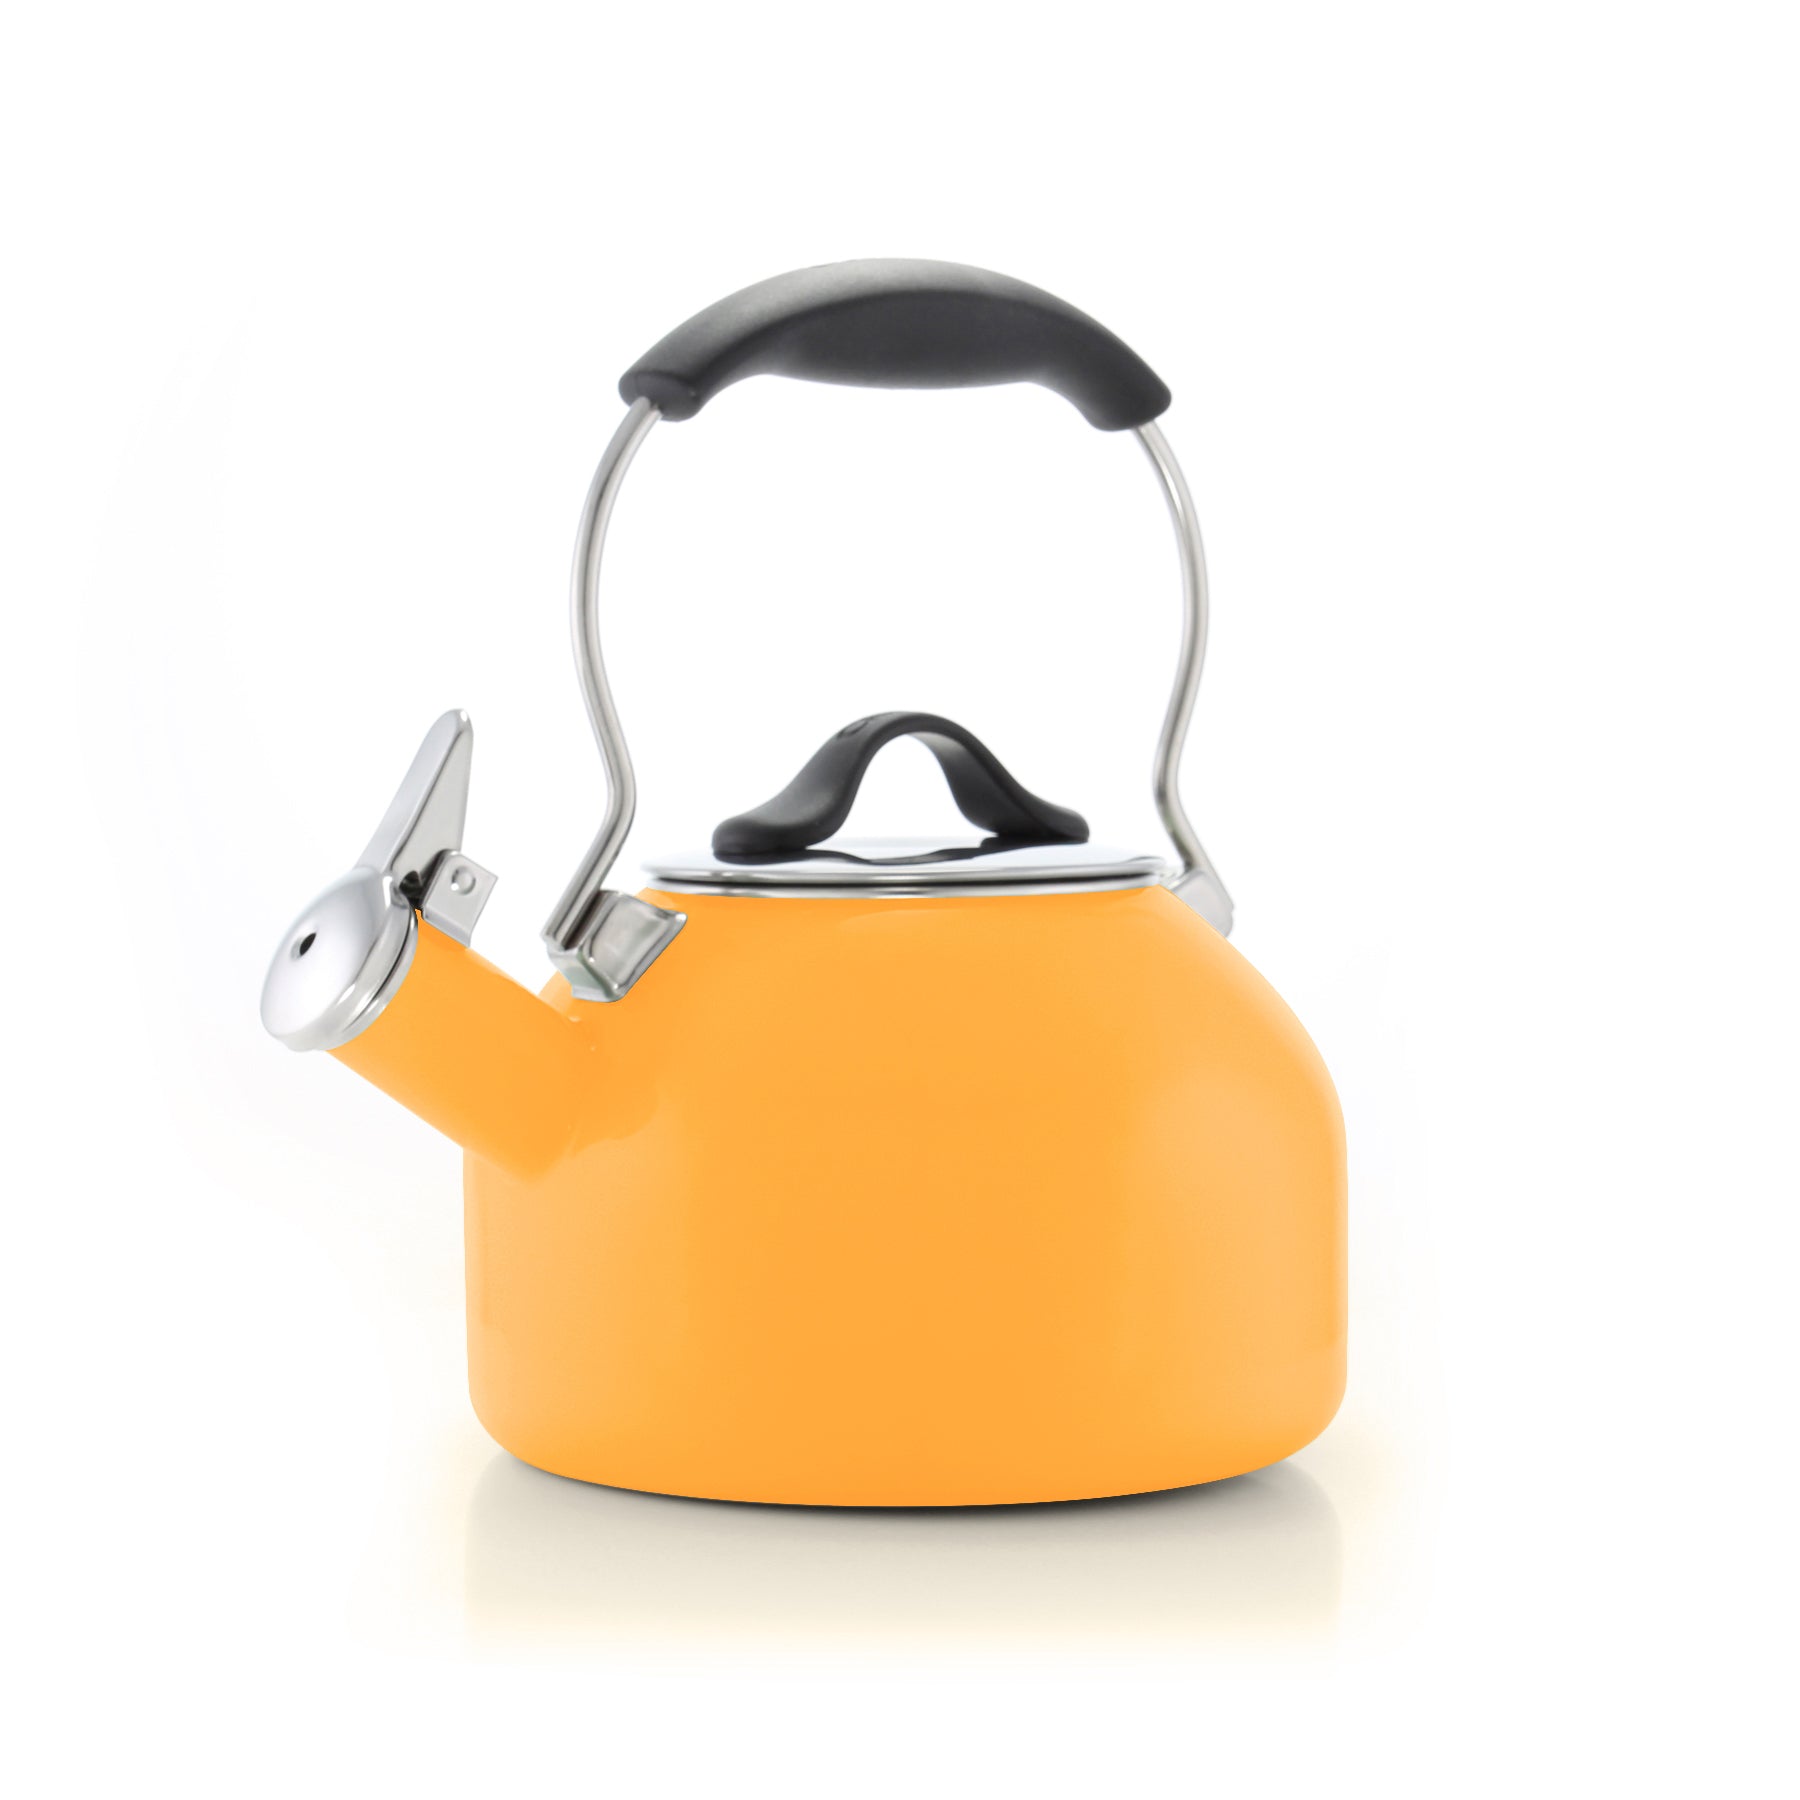 Limited Edition Vintage Teakettle Canary Yellow (1.7 Qt.)